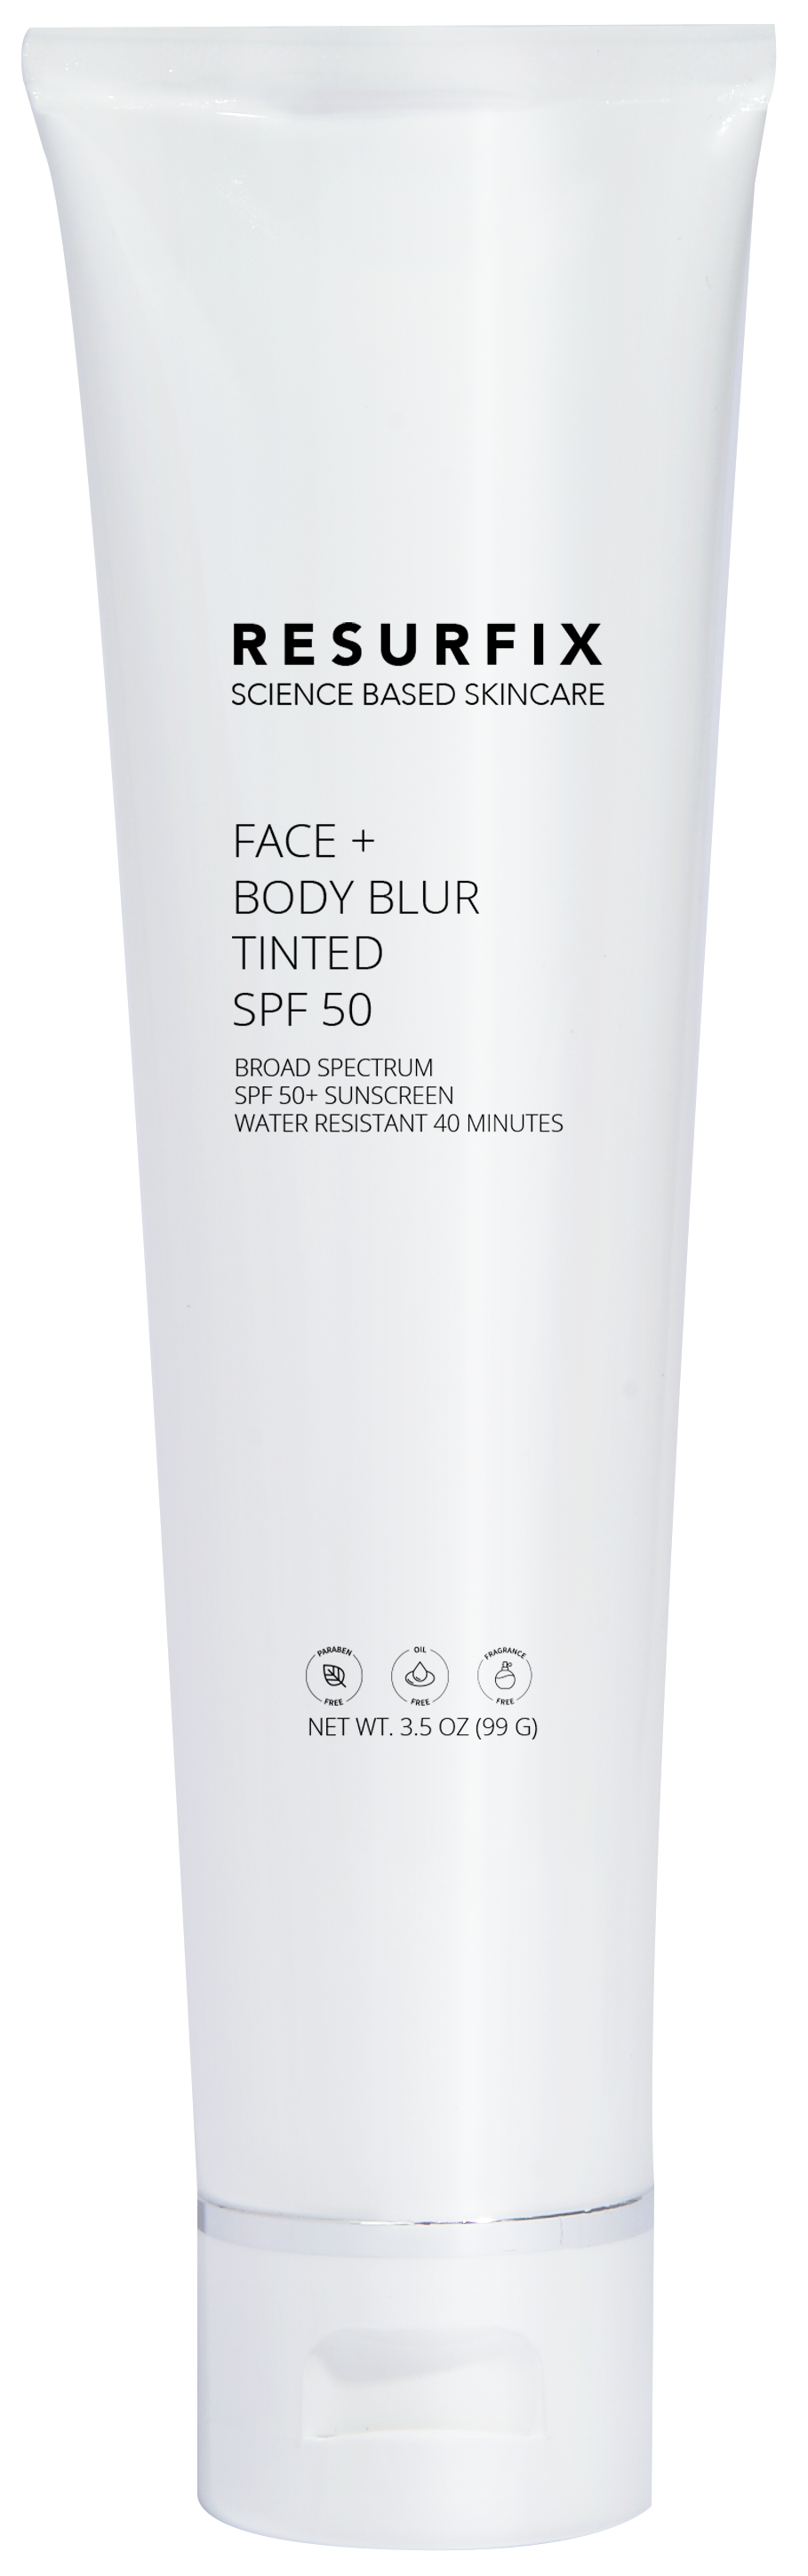 Face + Body Blur Tinted SPF 50